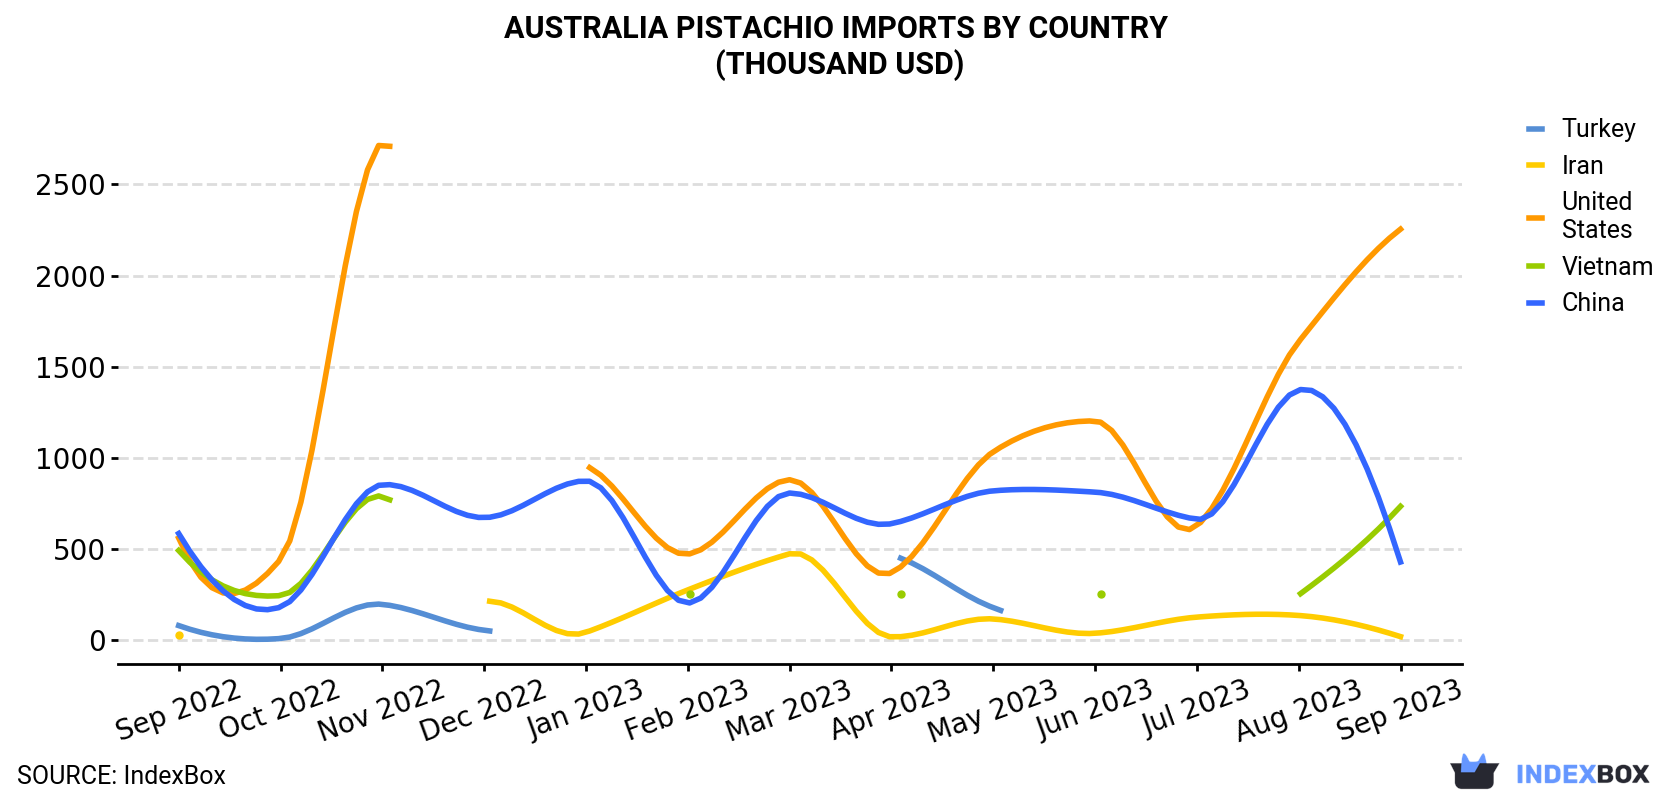 Australia Pistachio Imports By Country (Thousand USD)